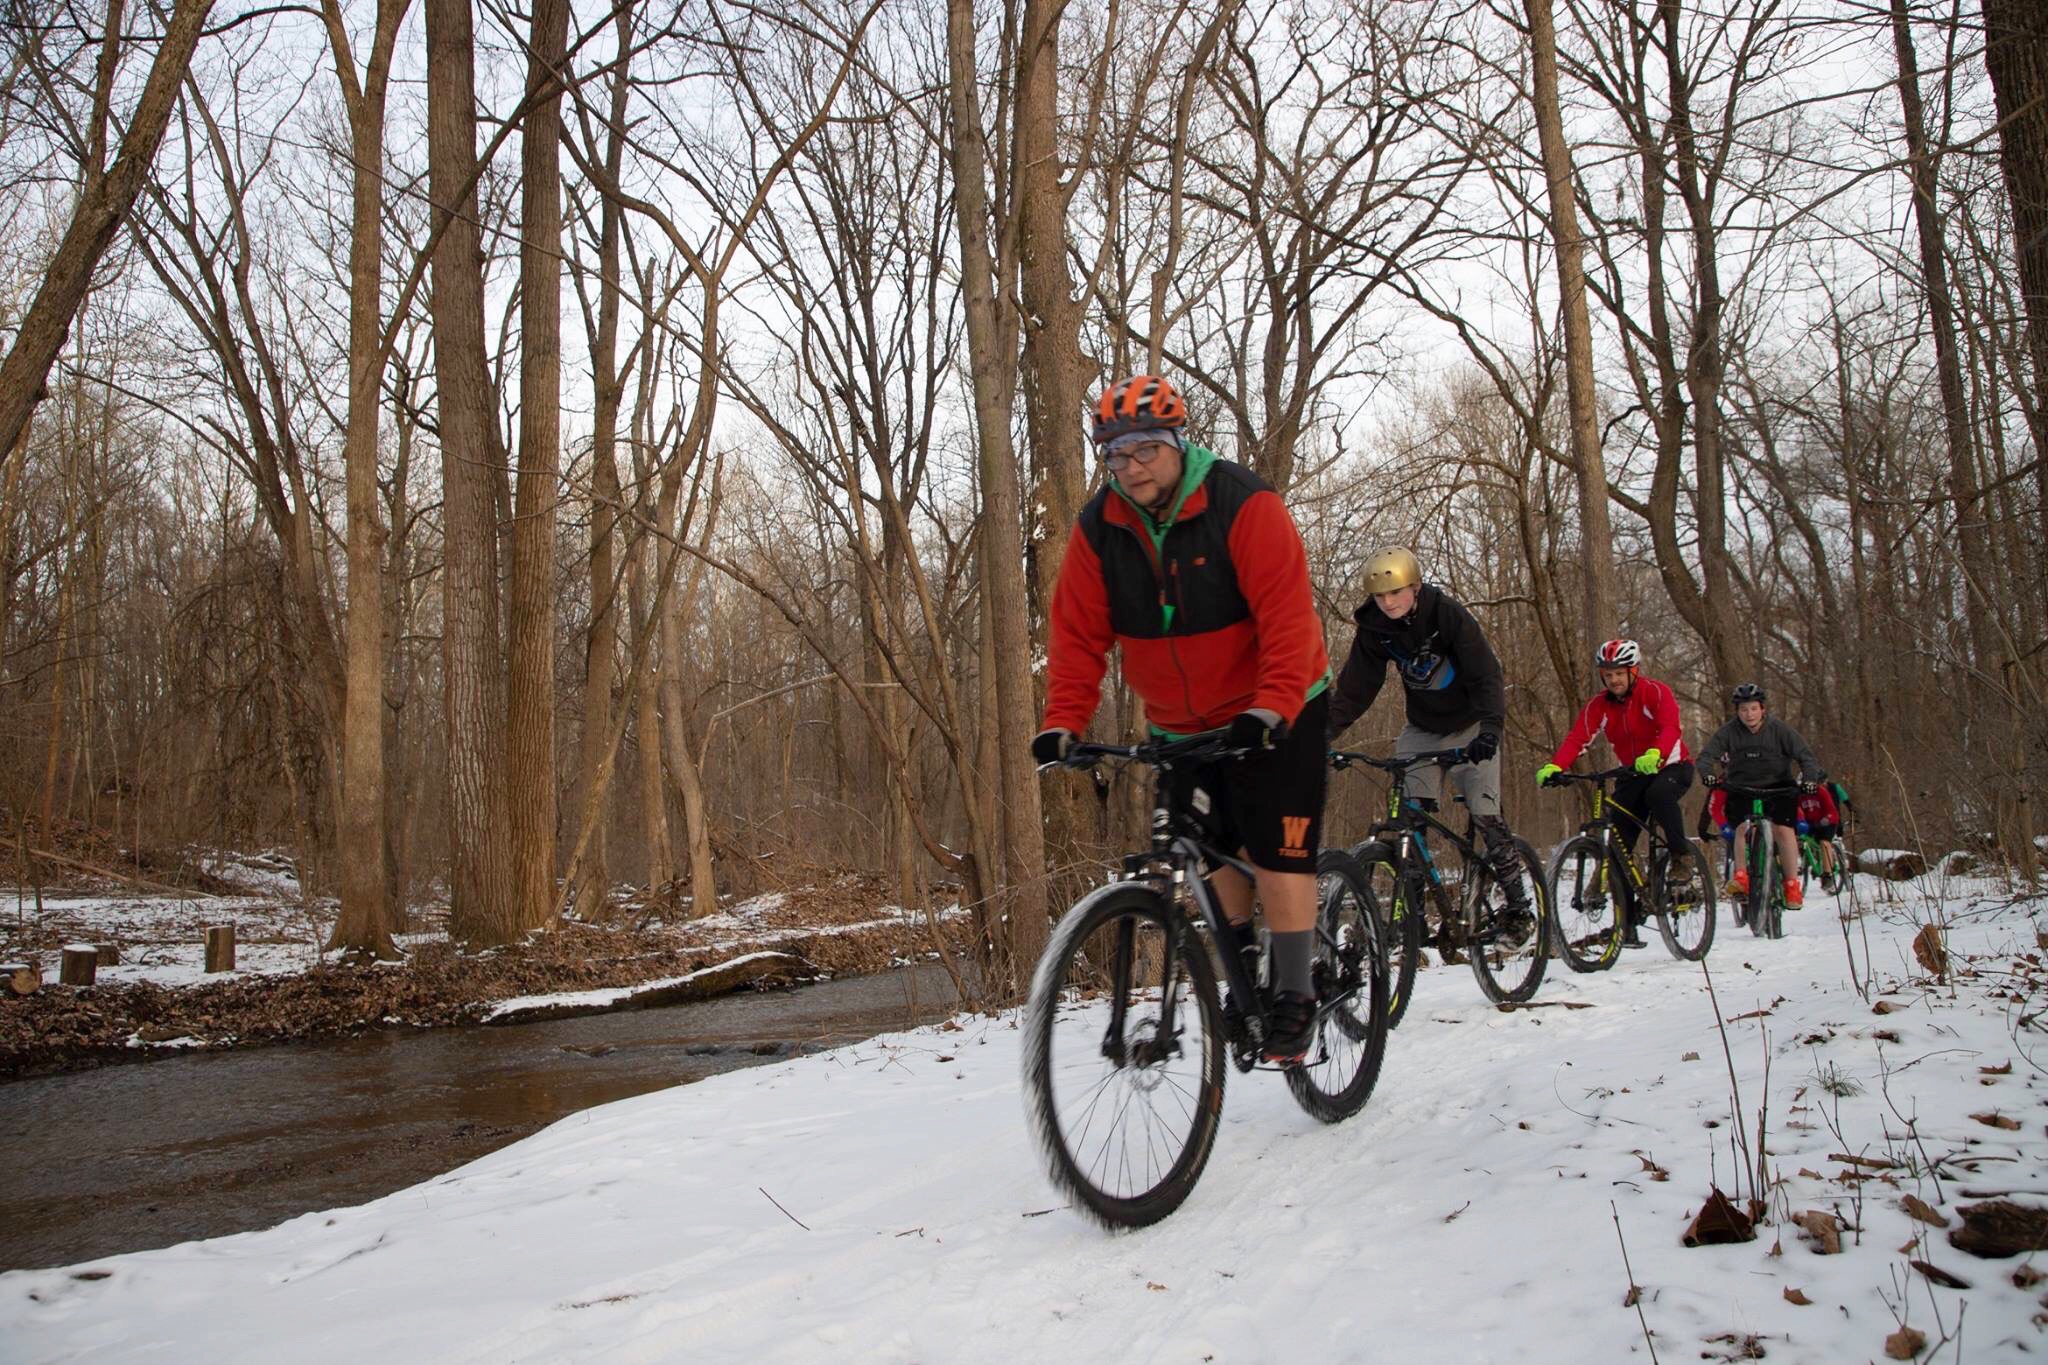 David “Cookie” Cook leads the Warsaw "Chain Breakers" on a winter ride.